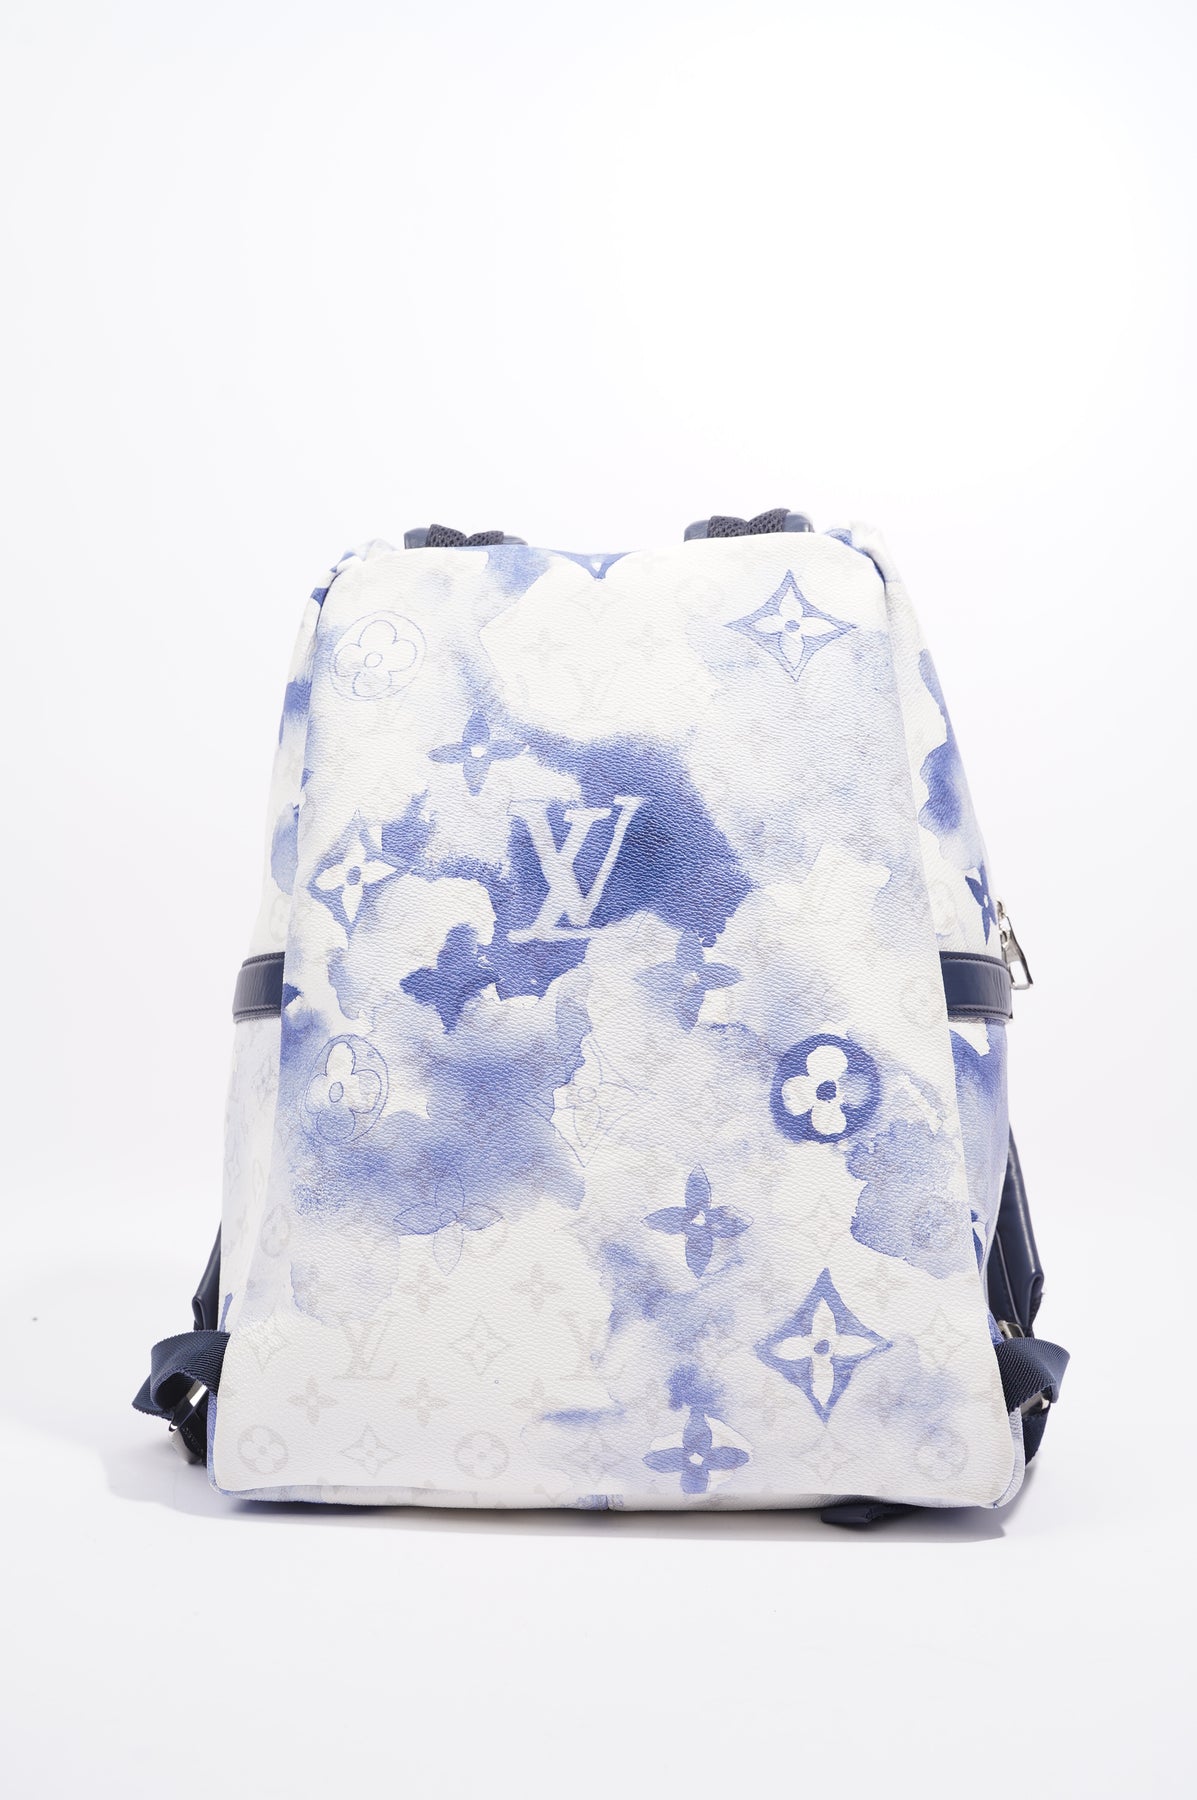 LOUIS VUITTON LIMITED EDITION DISCOVERY BACKPACK